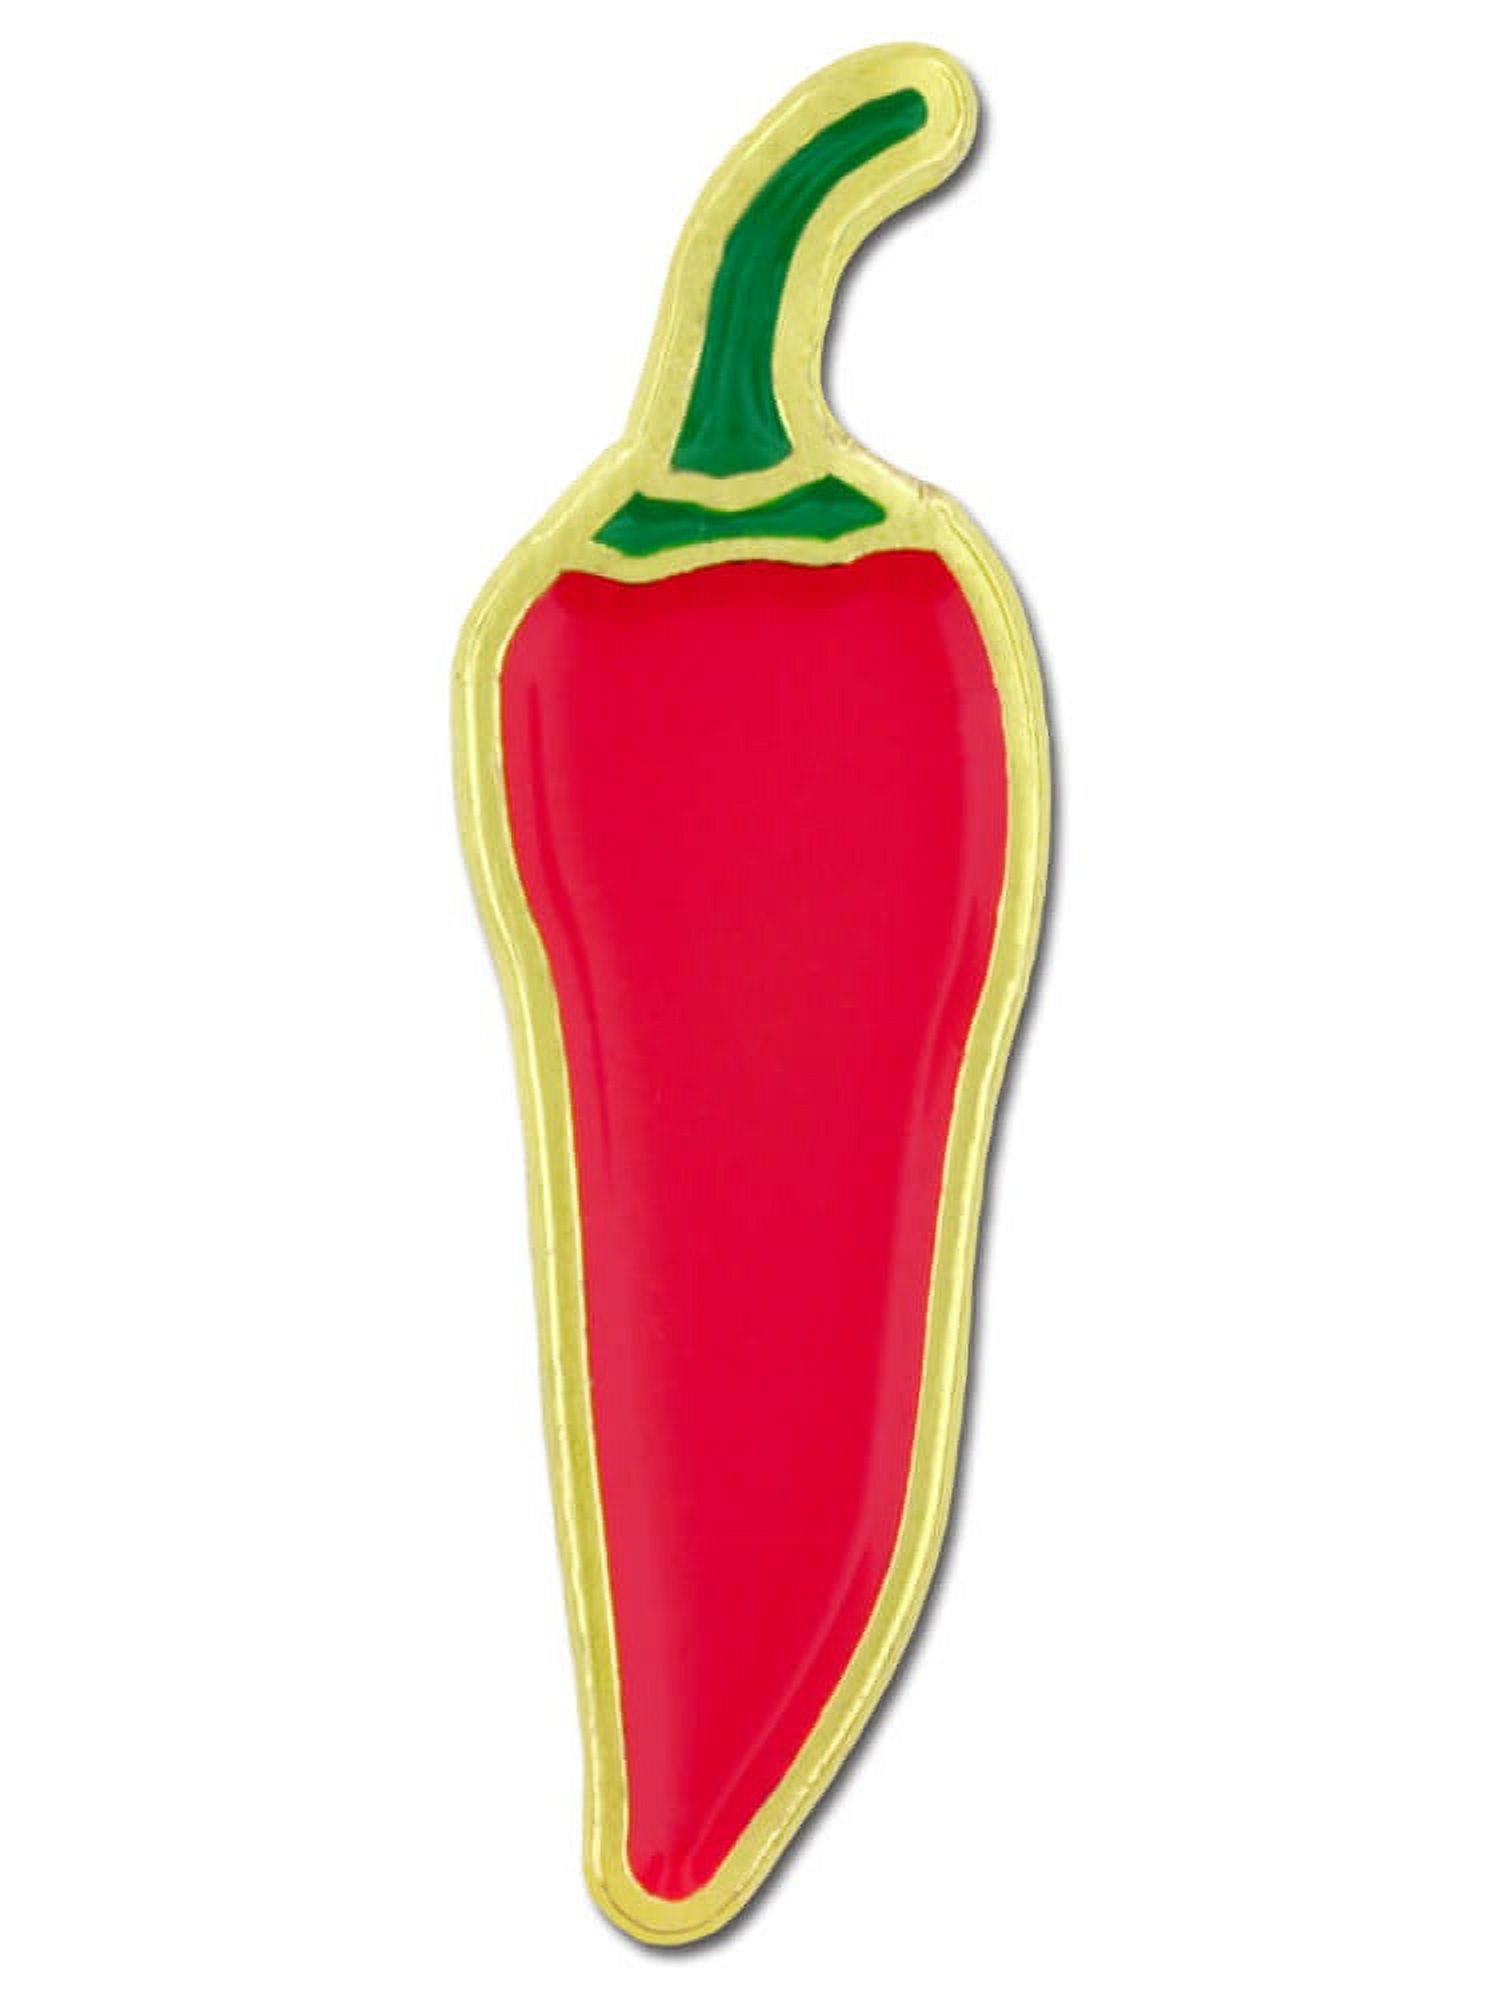 PinMart's Spicy Red Chili Pepper Food Enamel Lapel Pin - image 1 of 3